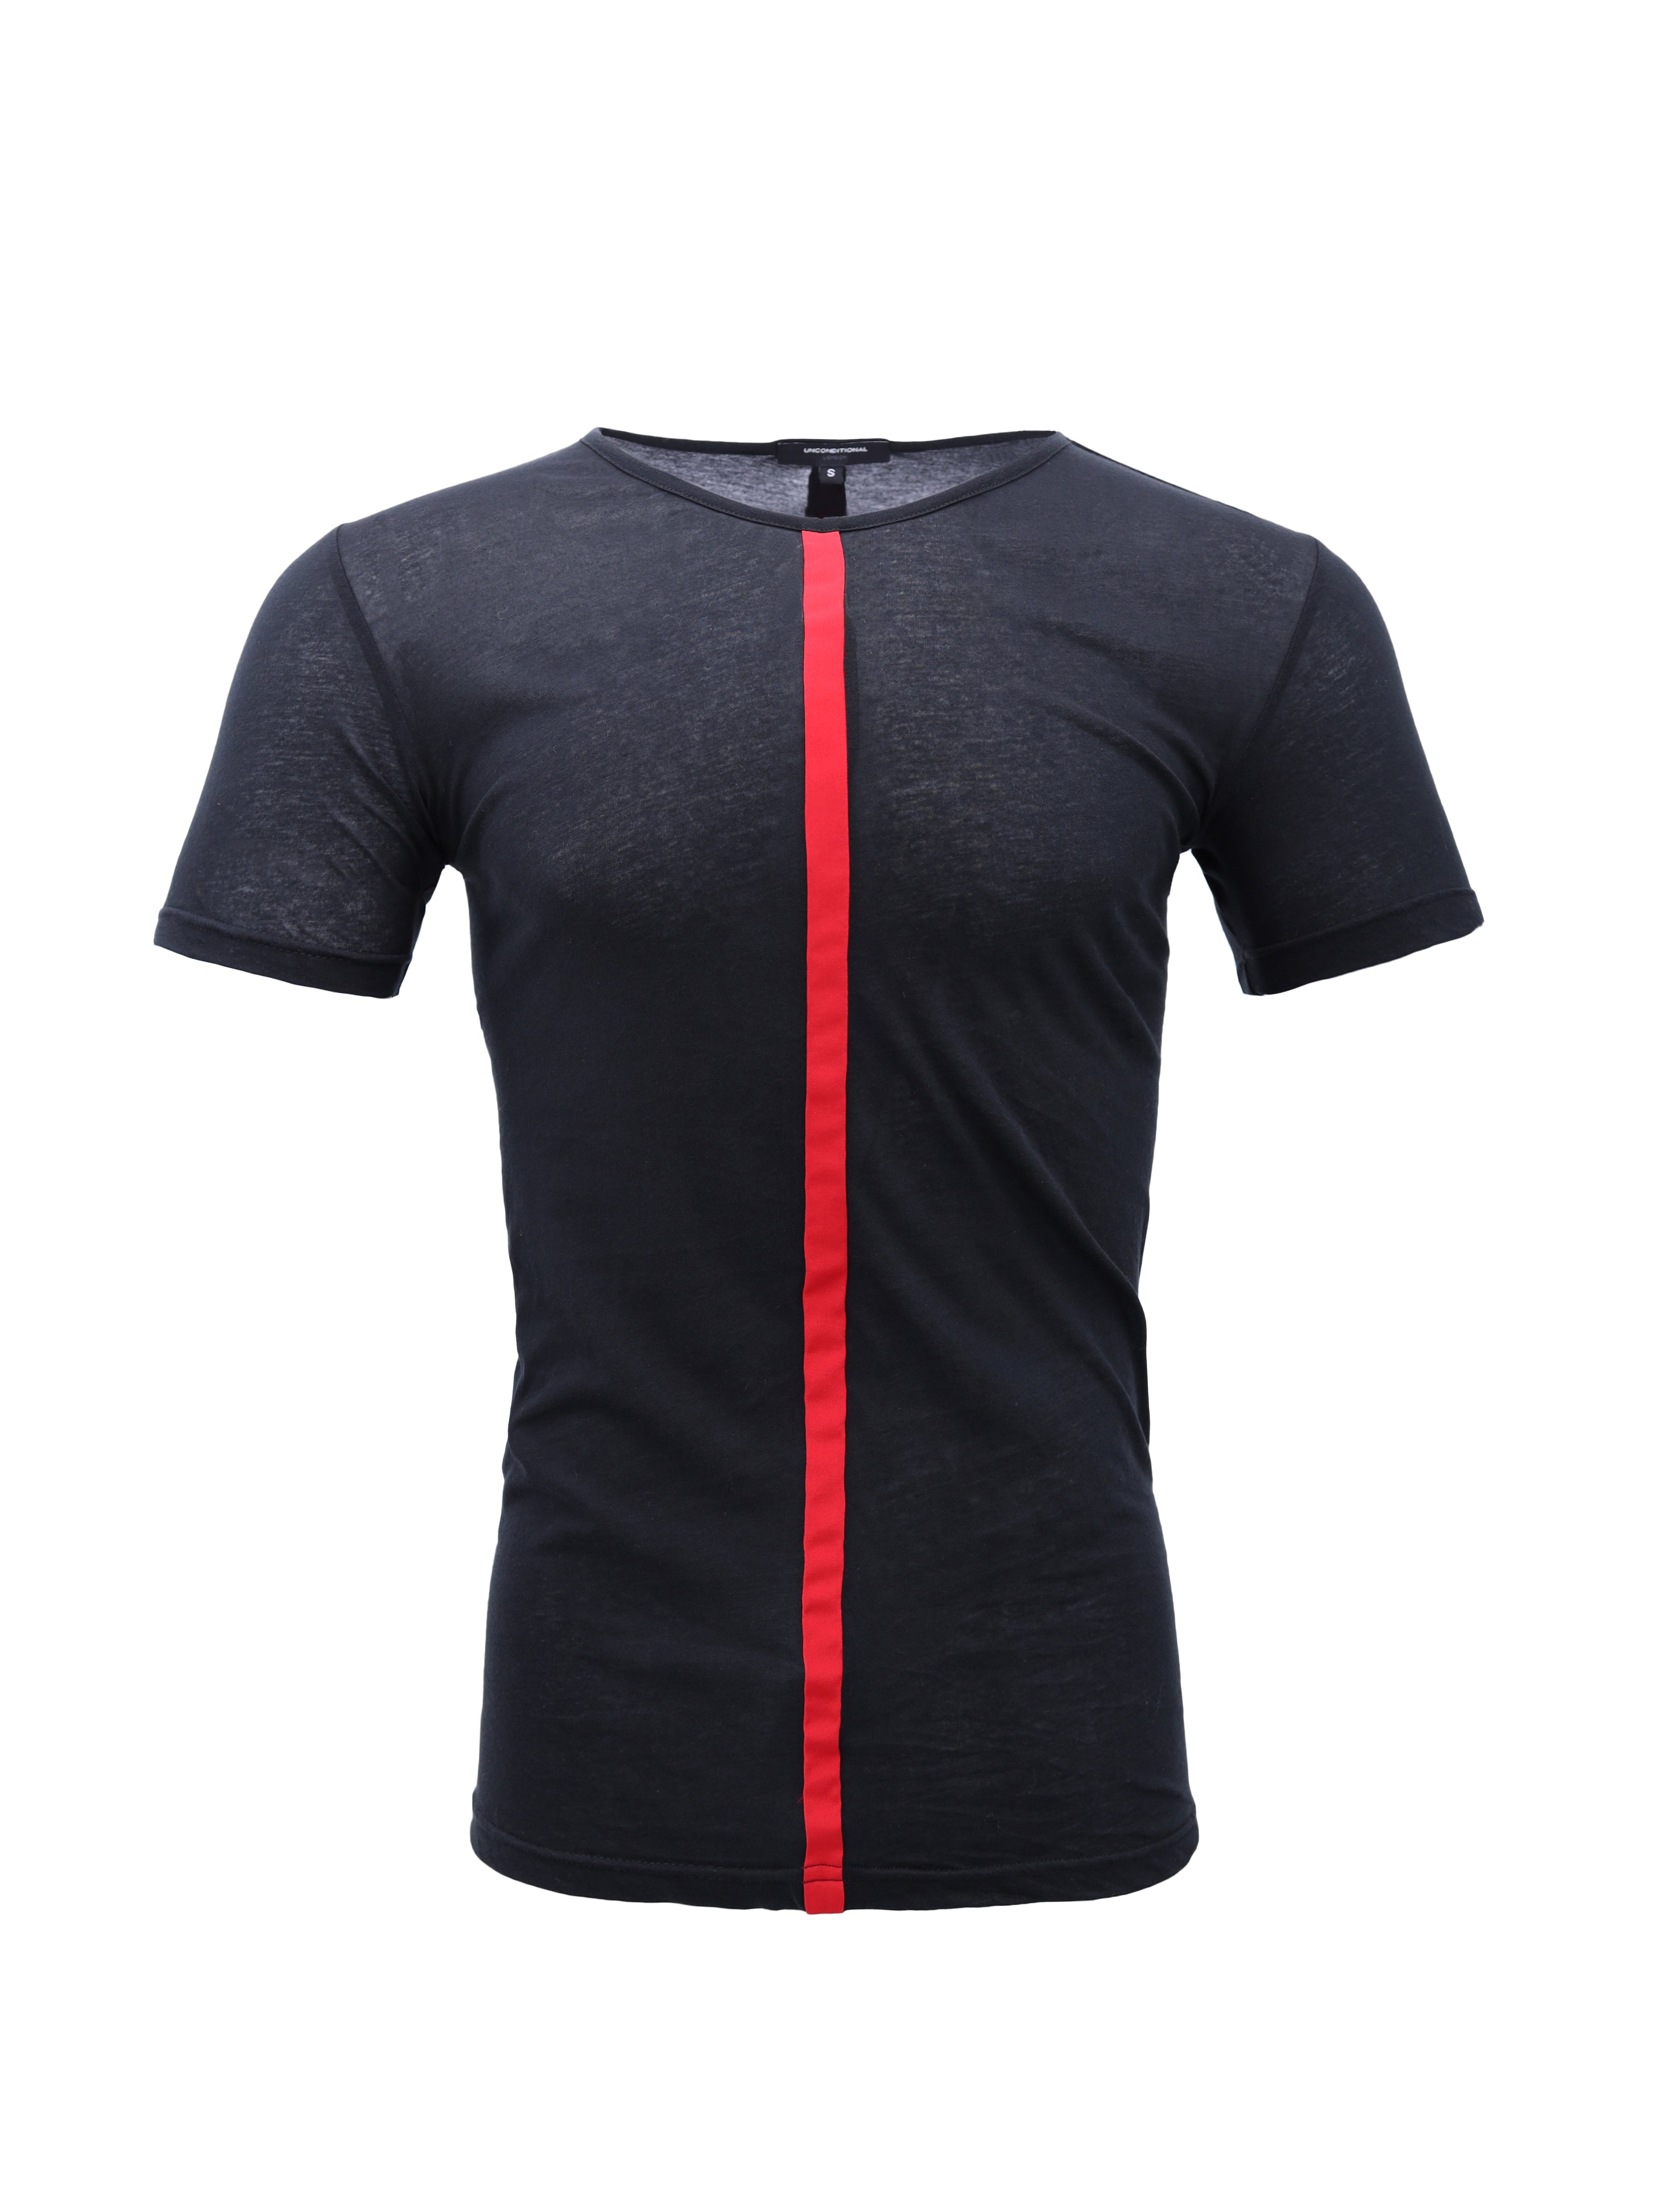 BLACK JERSEY T-SHIRT WITH RED STRIPE